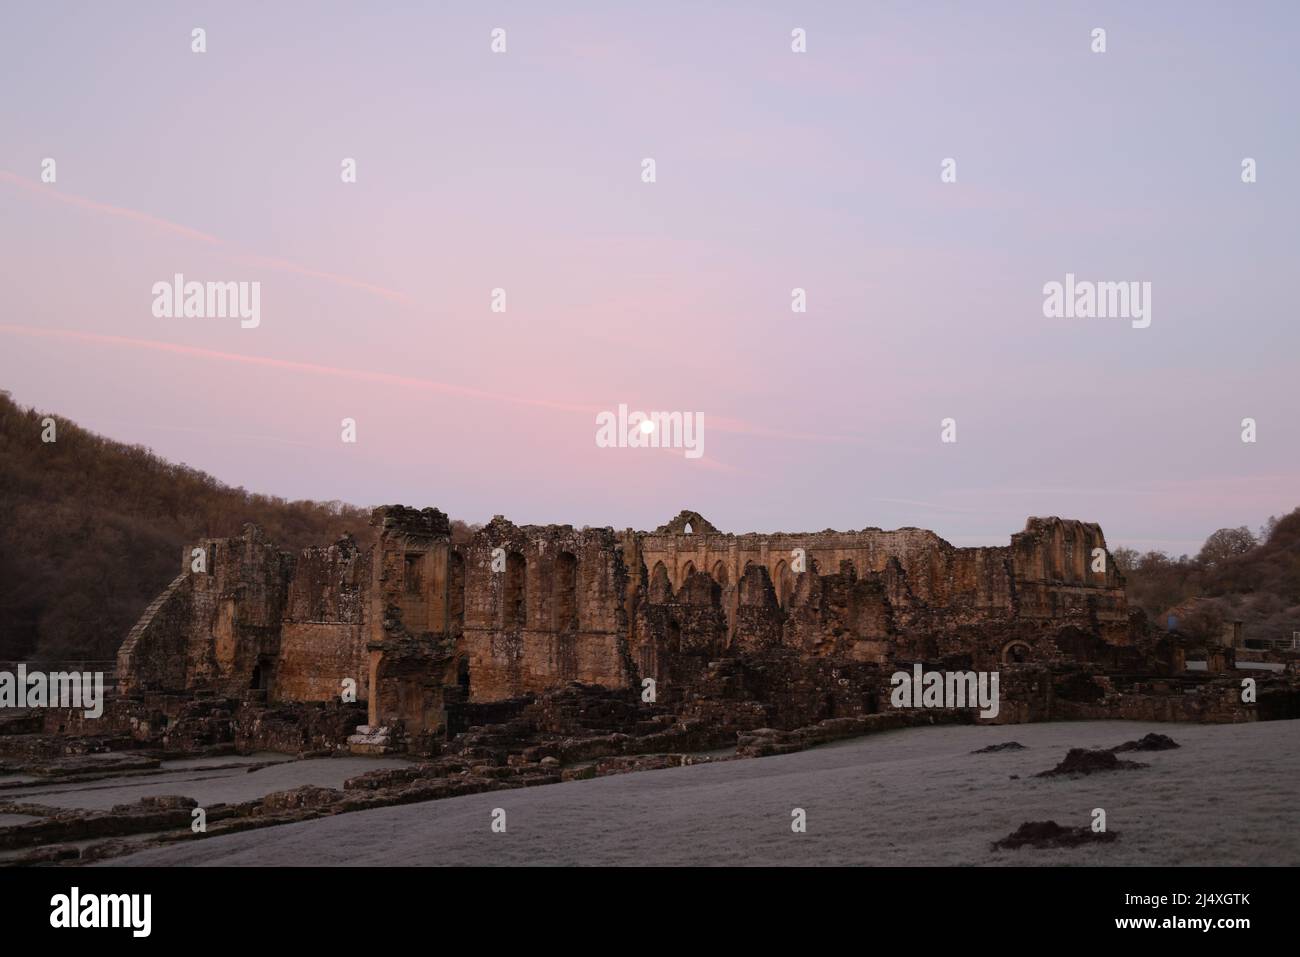 Infirmary cloister wall: cloister behind, & ruins foreground of Infirmary Hall & Abott's House. Ruined Rievaulx Cistercian Abbey. Dawn after moonrise. Stock Photo